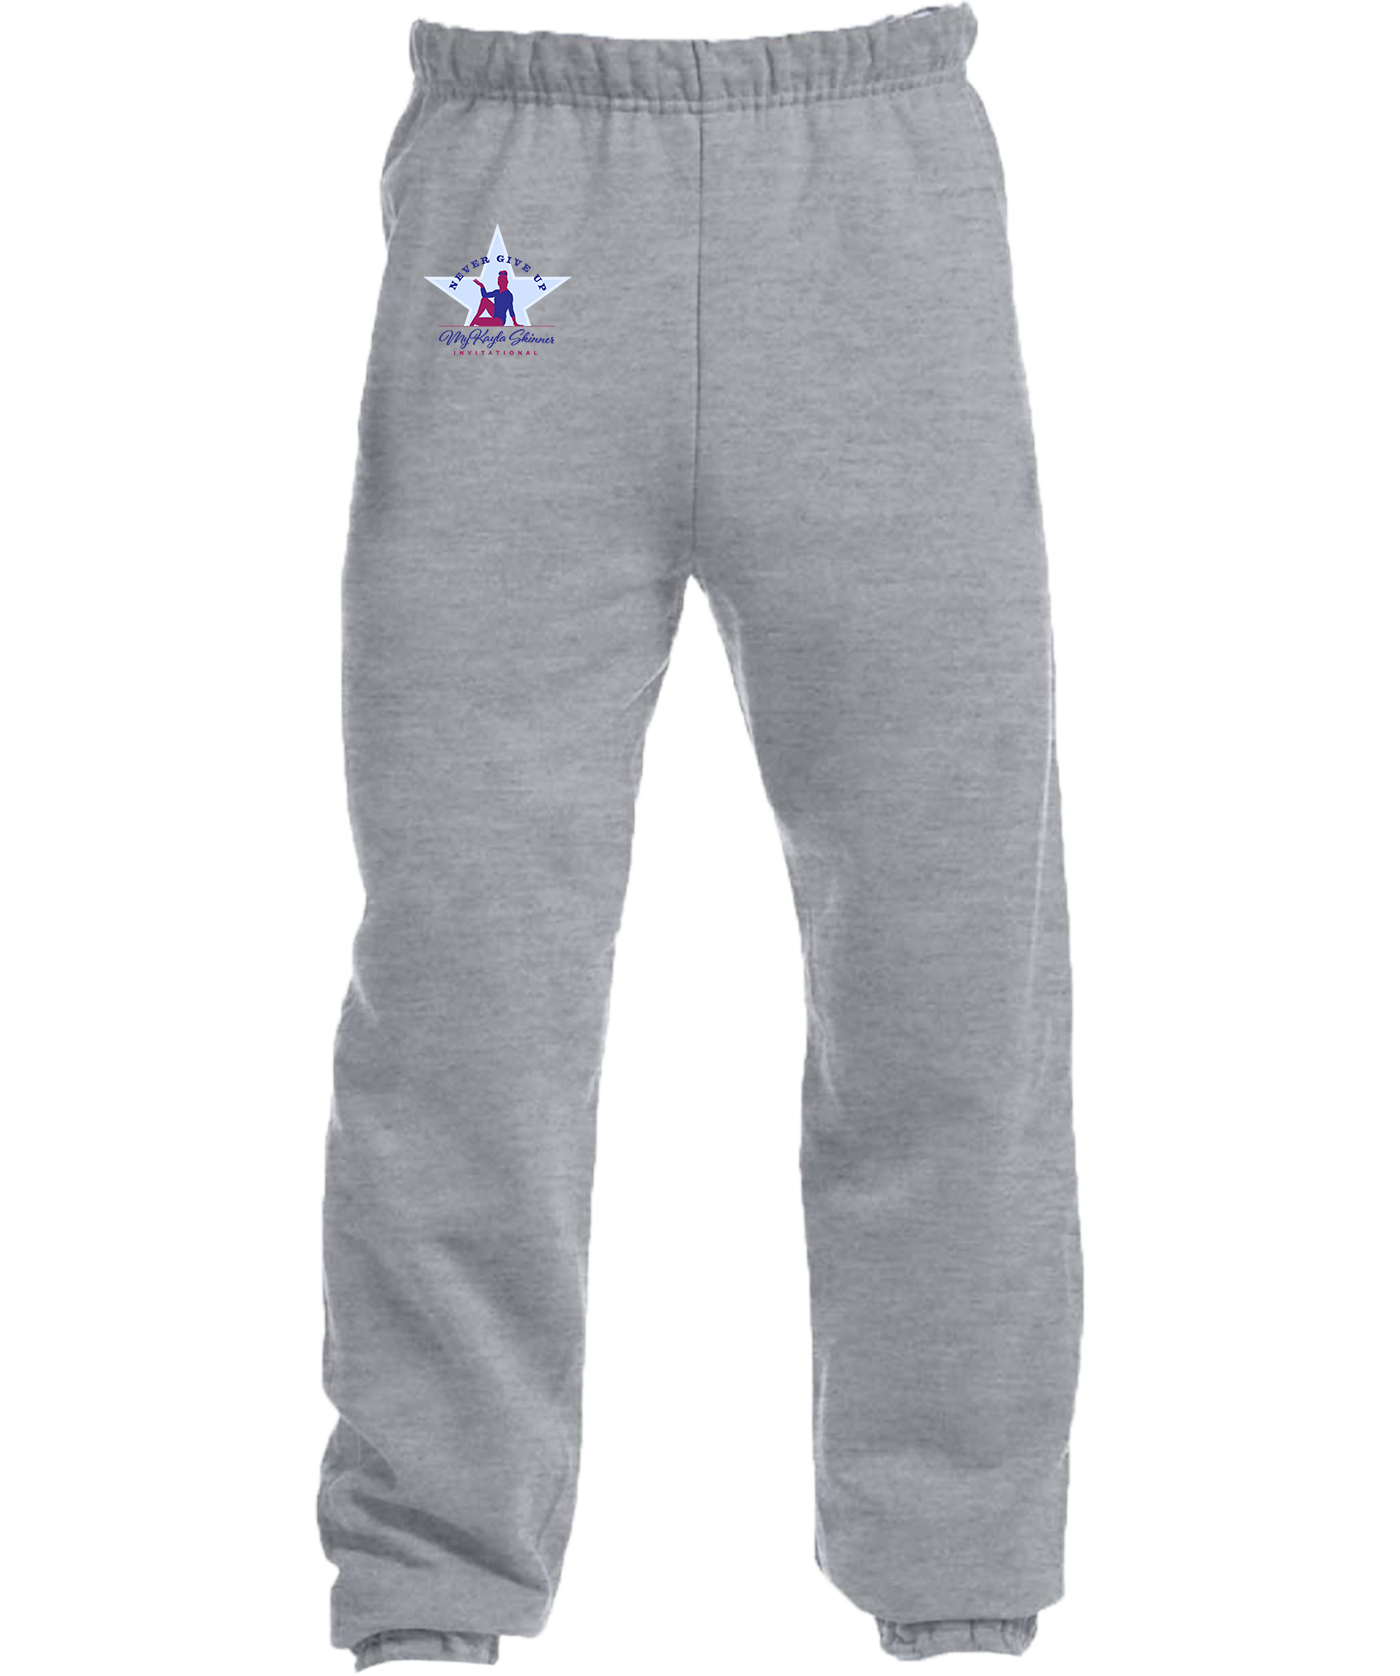 SWEAT PANTS - 2023 Never Give Up with MyKayla Skinner